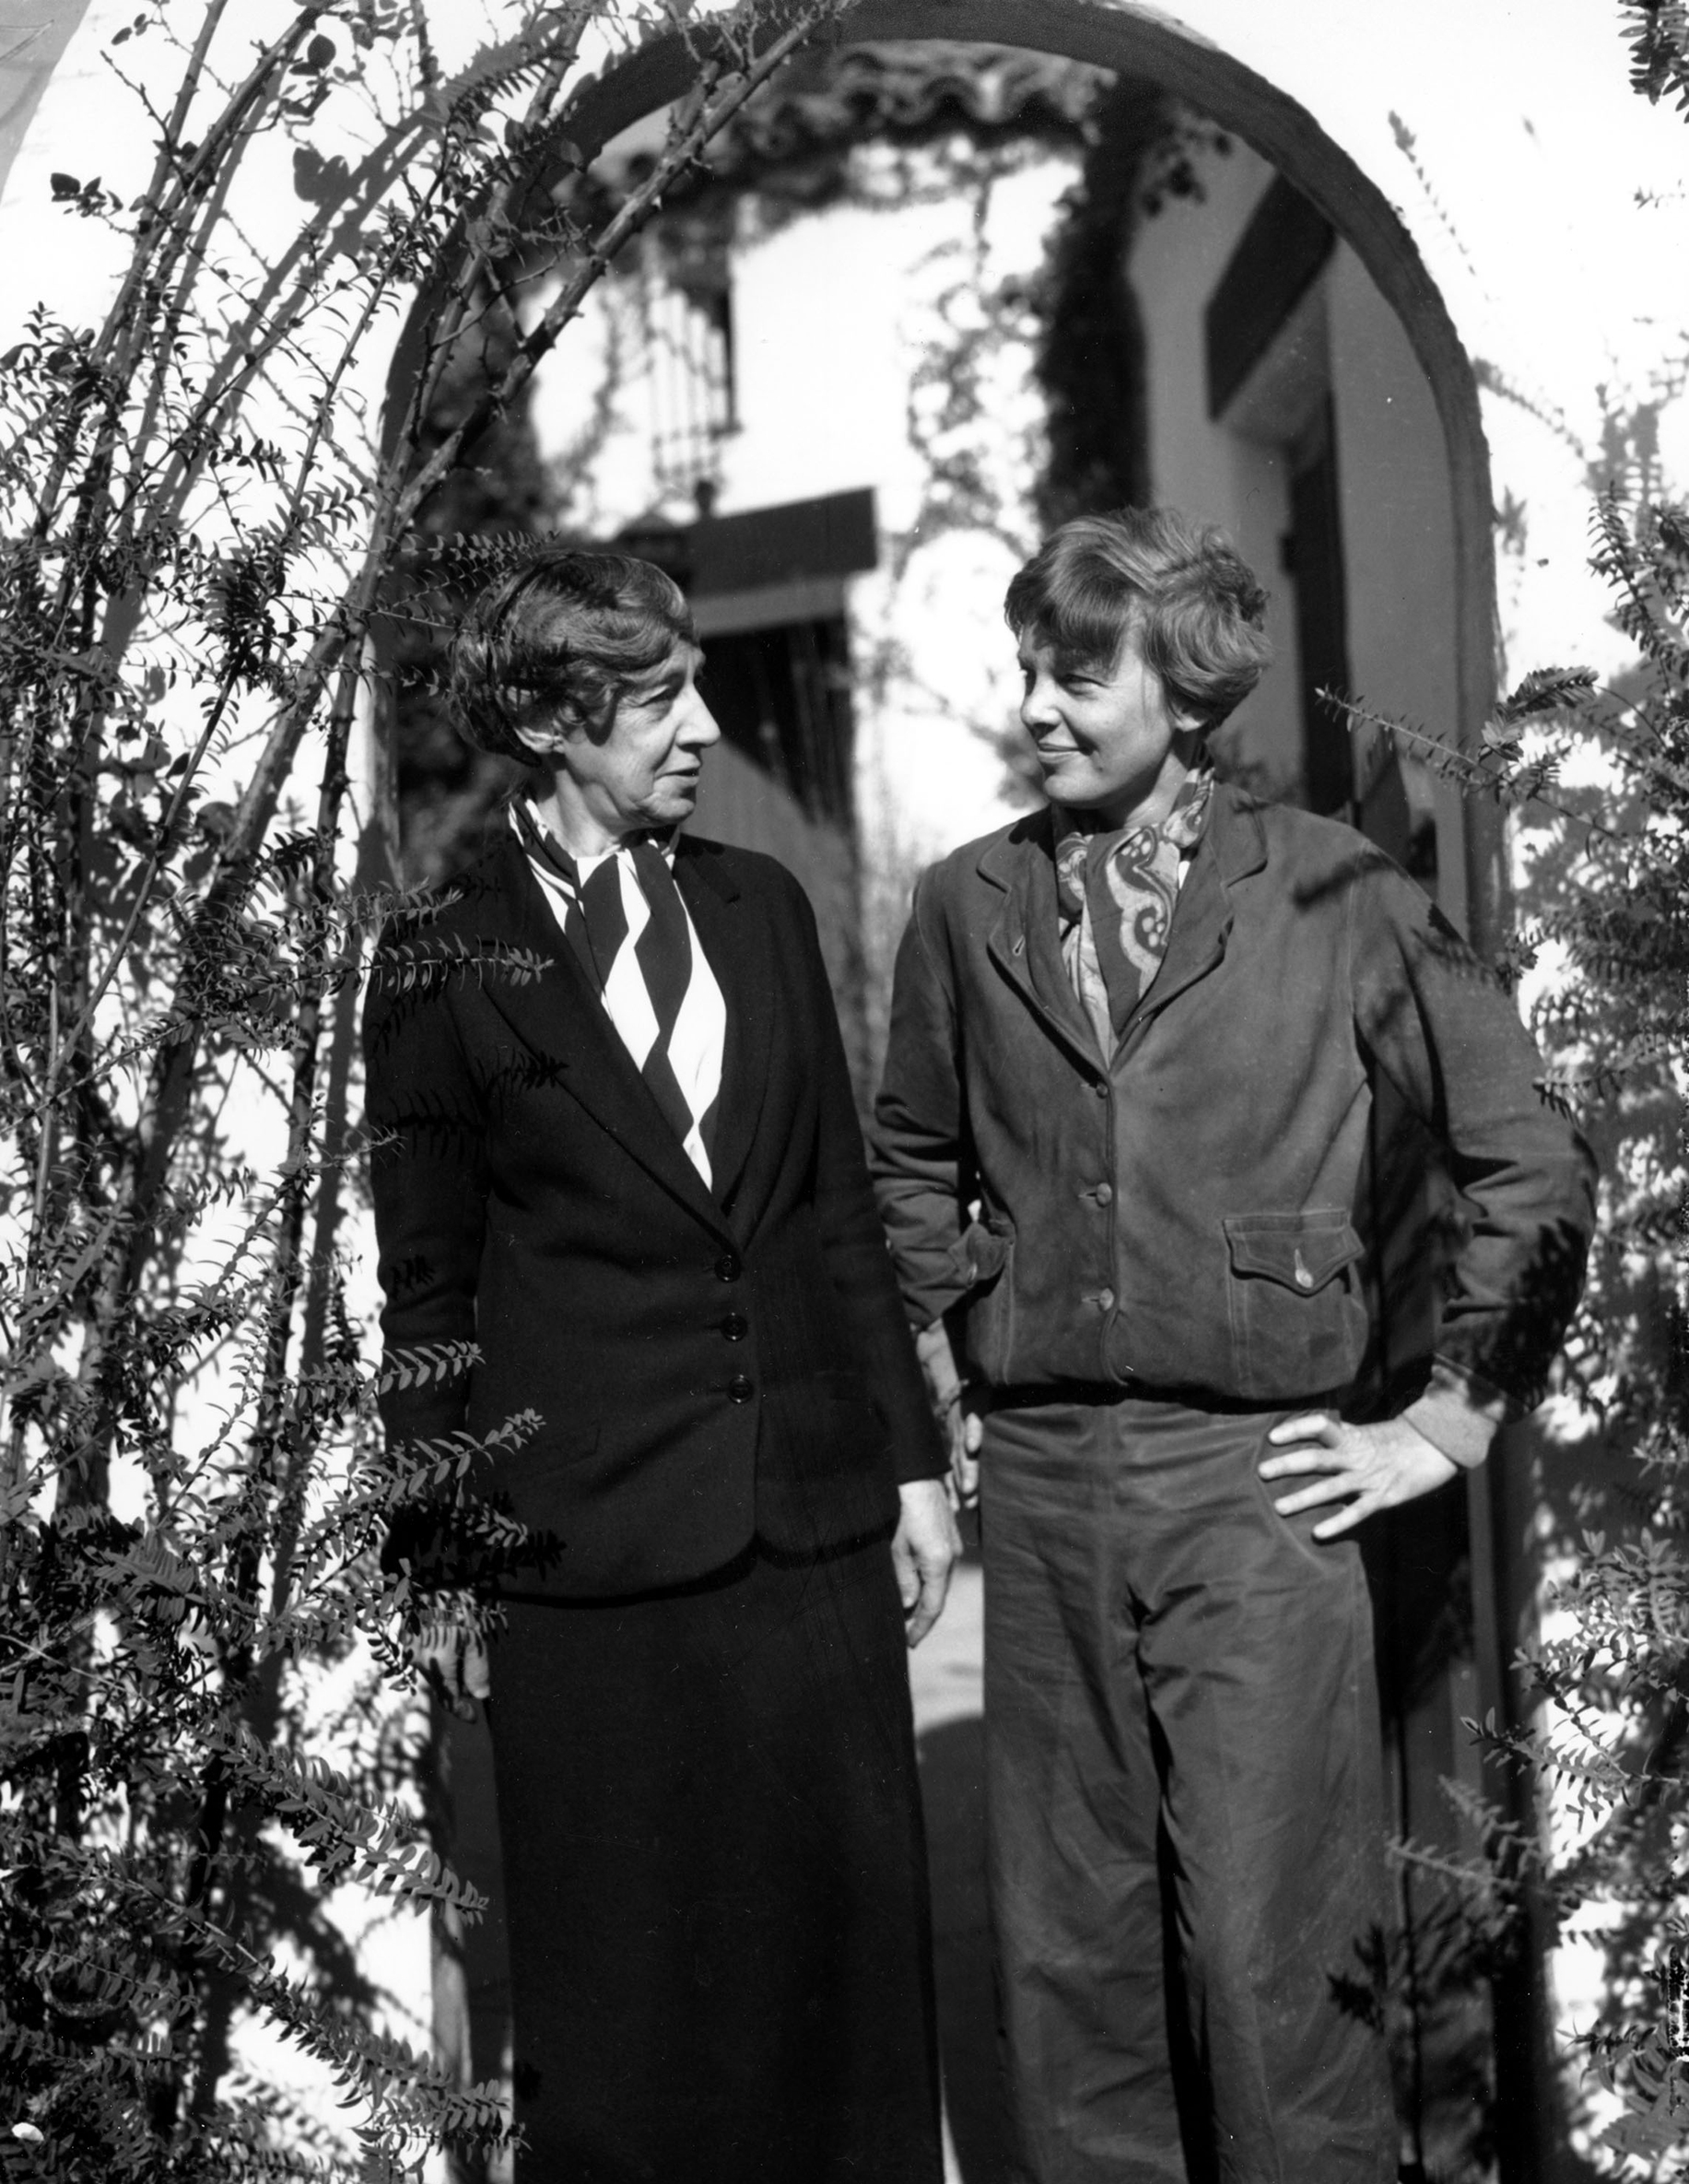 Aviator Amelia Earhart visits her mother, Amy Otis Earhart, at home in Hollywood, Calif., on Jan. 14, 1935.